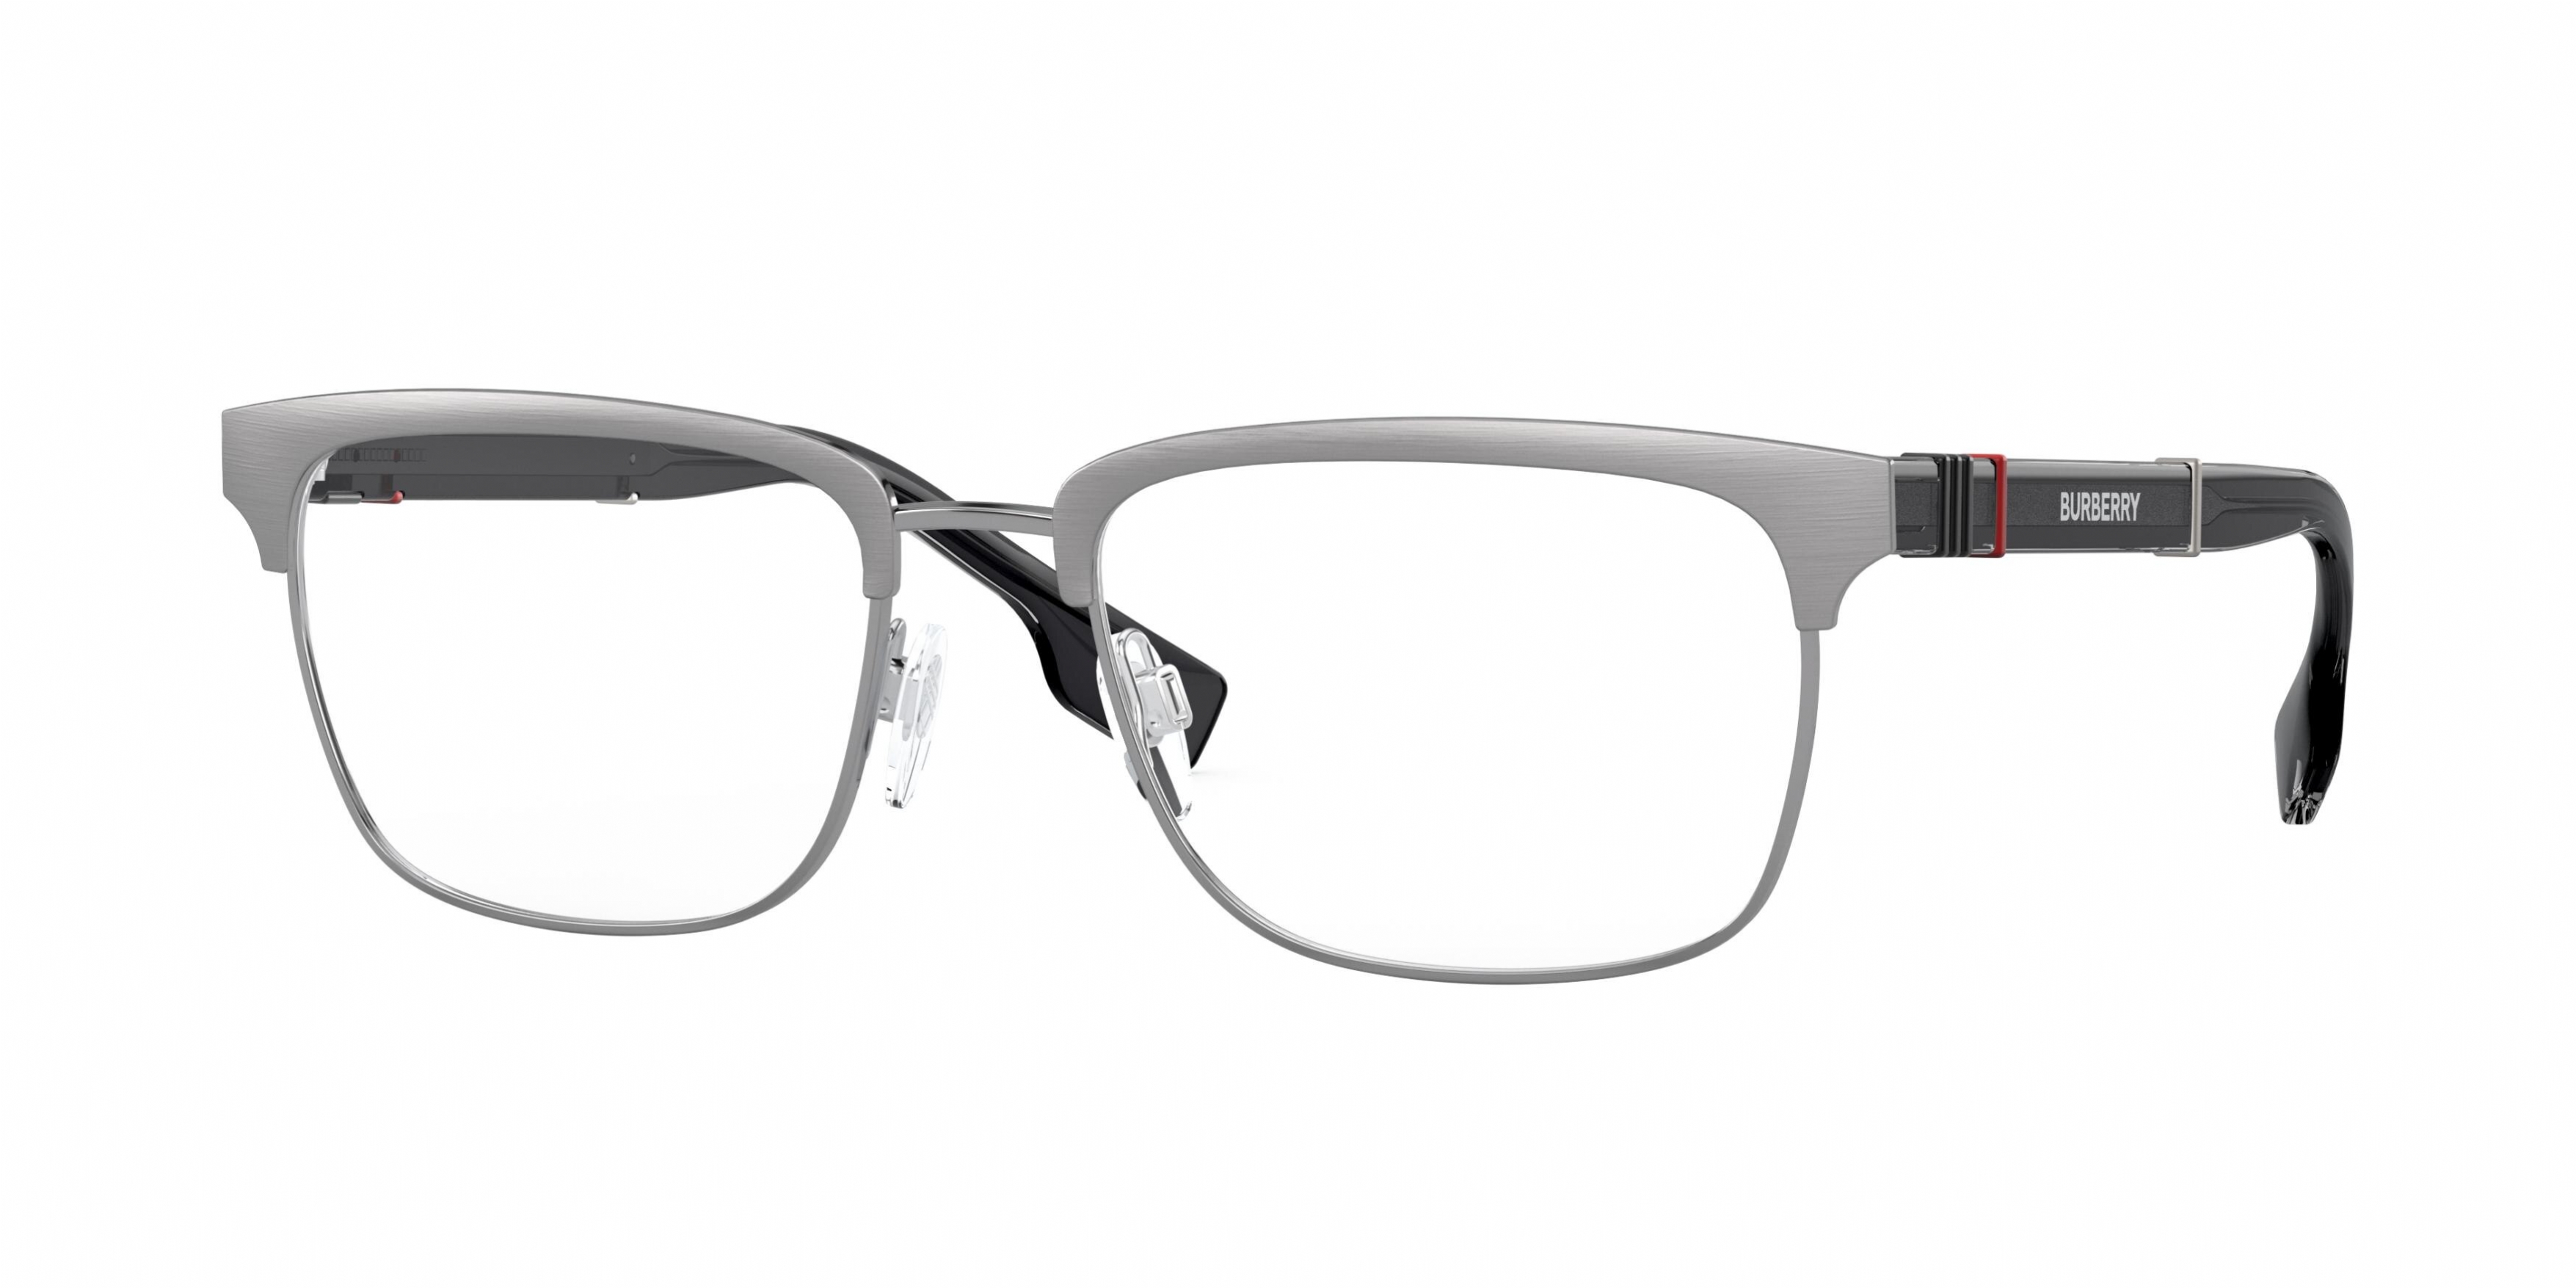 Buy Burberry Eyeglasses directly from OpticsFast.com